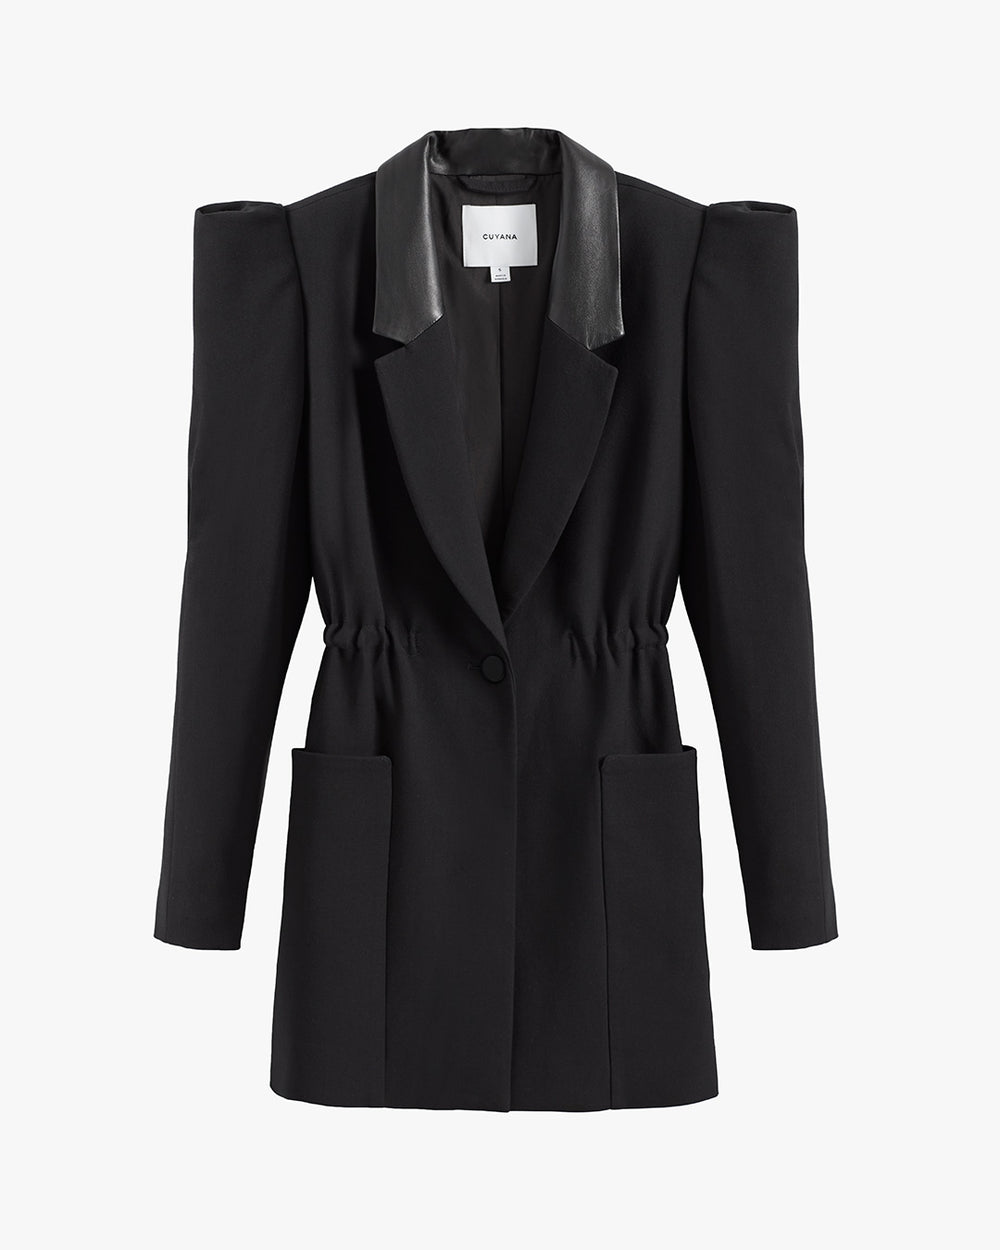 Blazer with exaggerated shoulder pads and lapels, buttoned front, and two pockets.